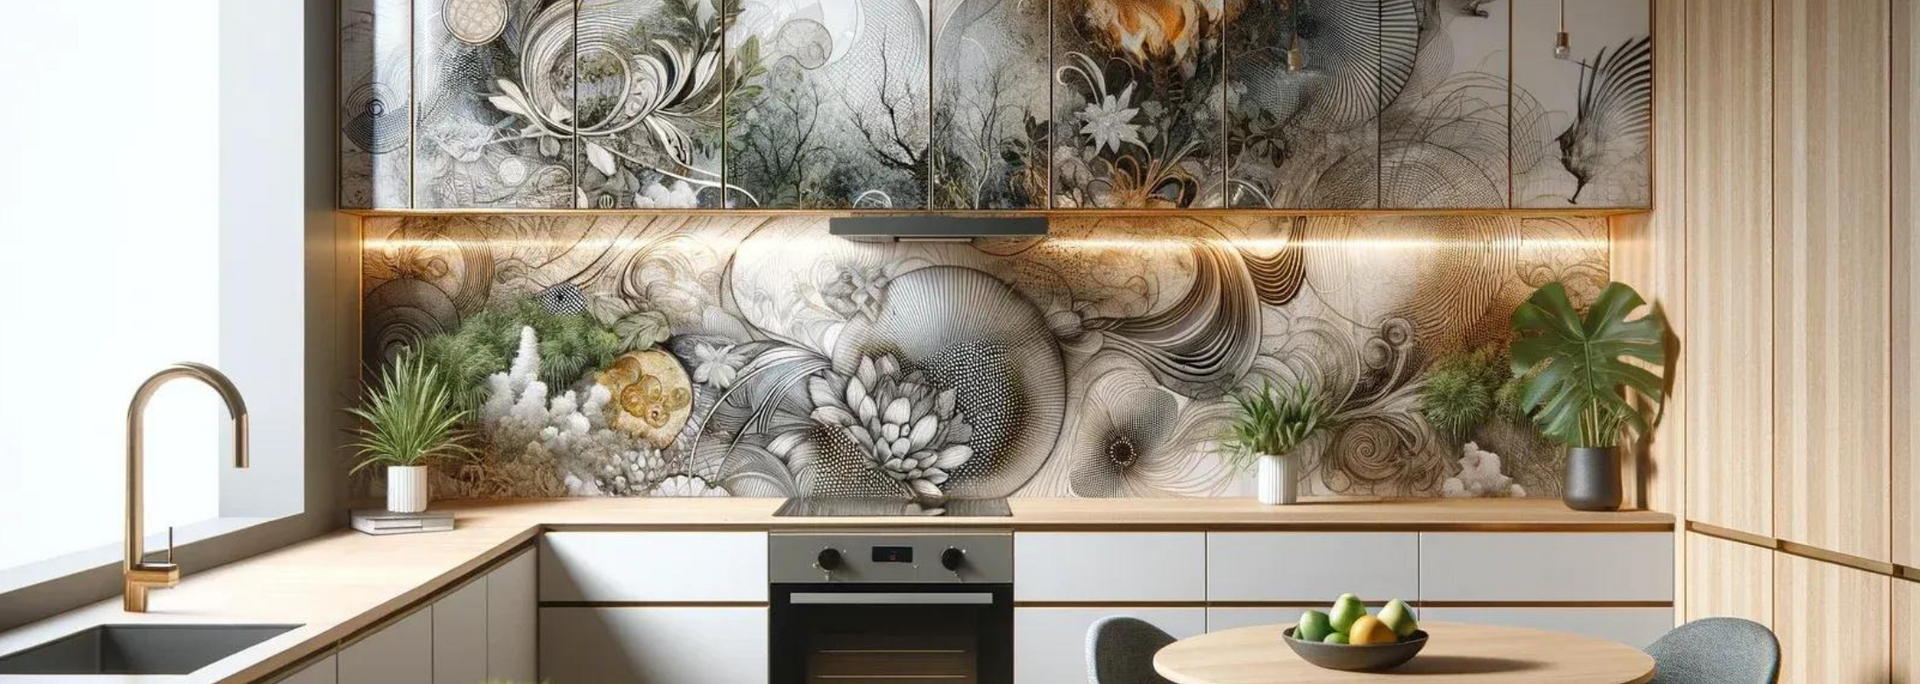 Picture of a printed glass kitchen splashback.